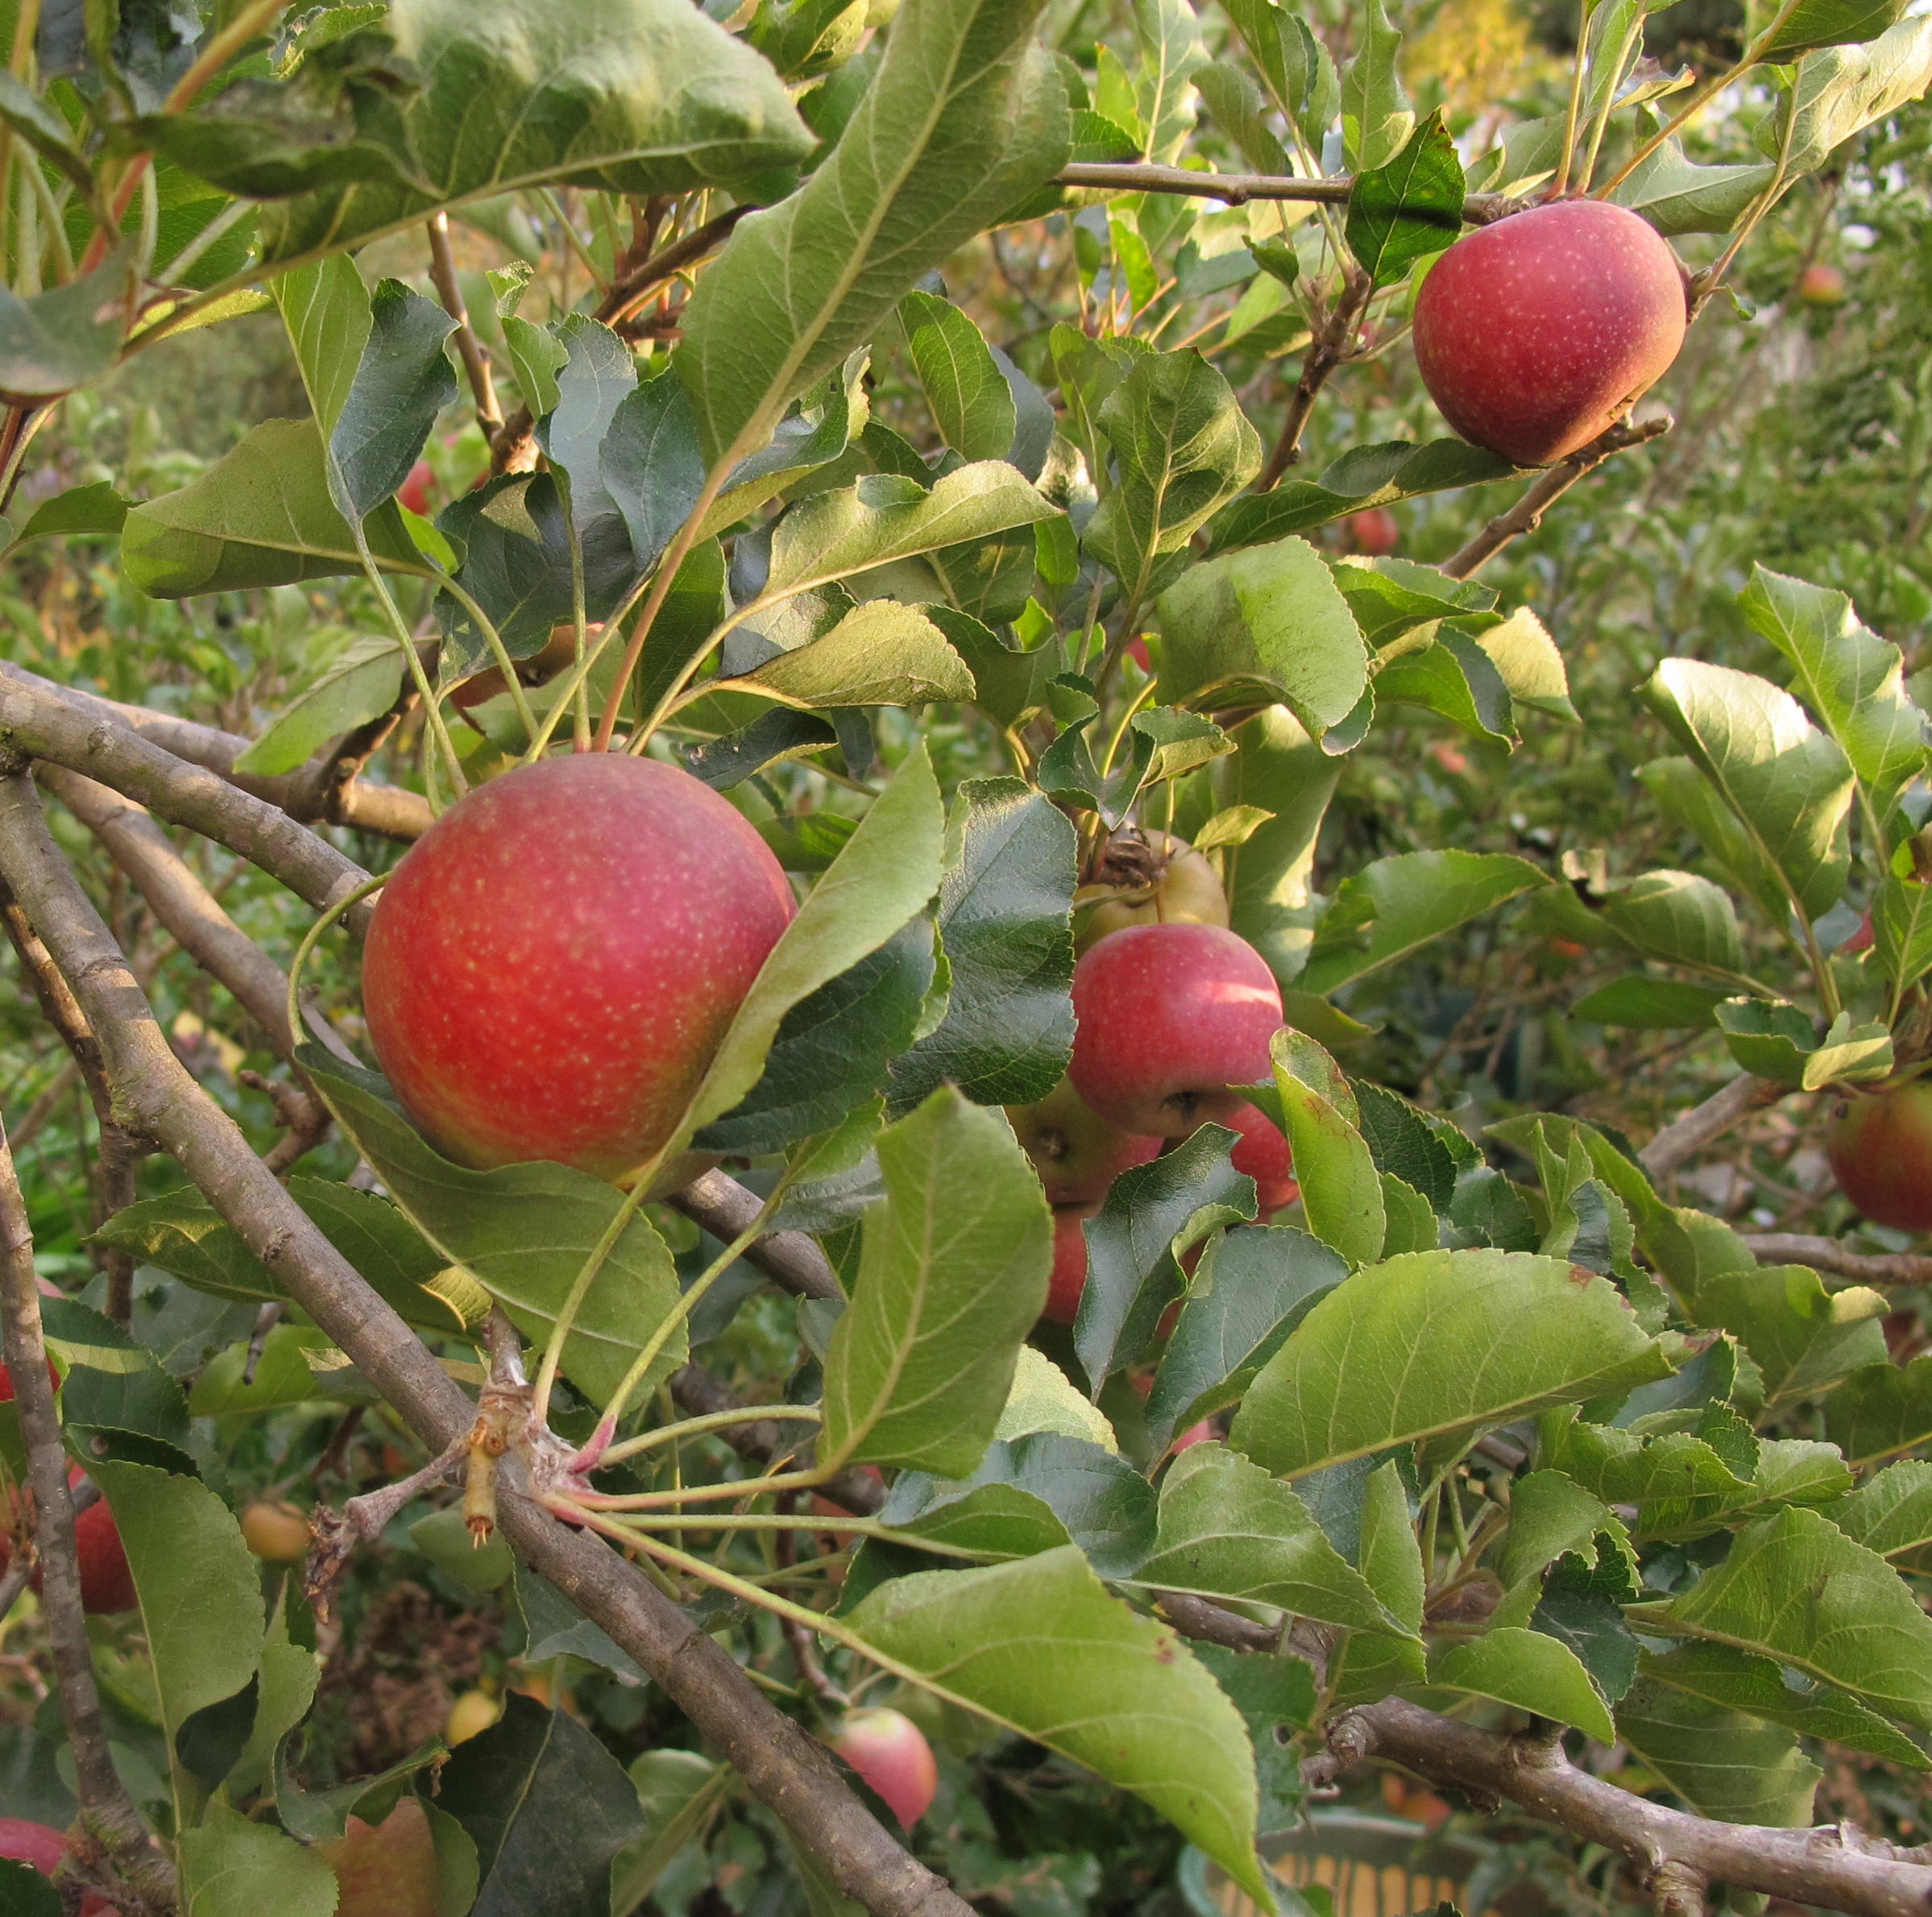 It’s Bare Root Season – the Best Time to Shop for New Fruit Trees!